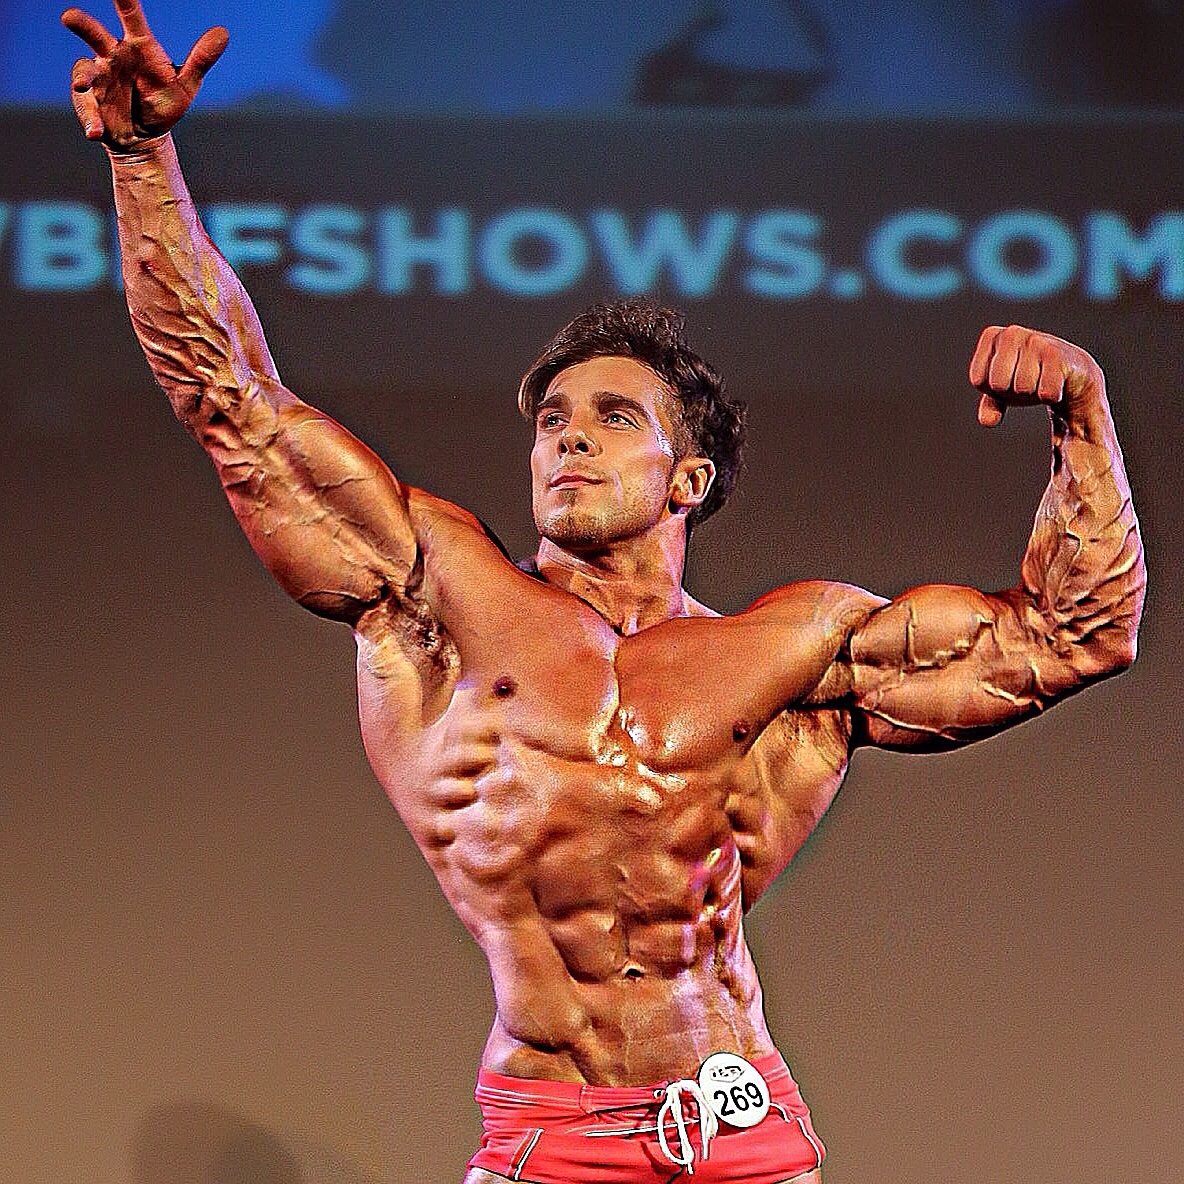 Top 5 Bodybuilders That Would Make Perfect Classic Physique Champions